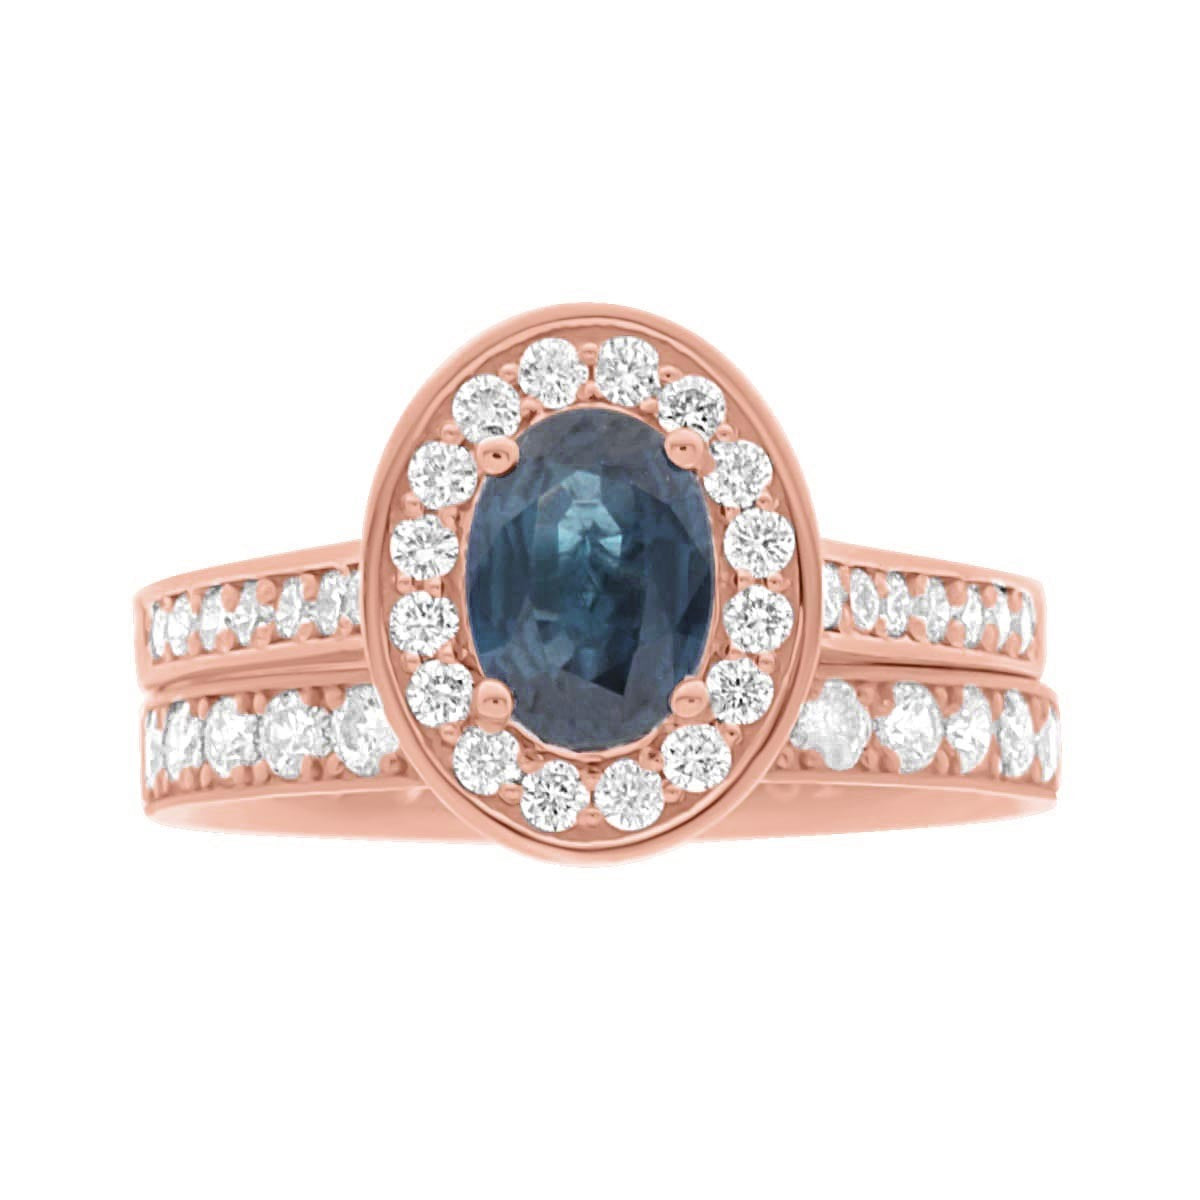 Sapphire Halo Engagement Ring with a matching rose gold and diamond wedding ring